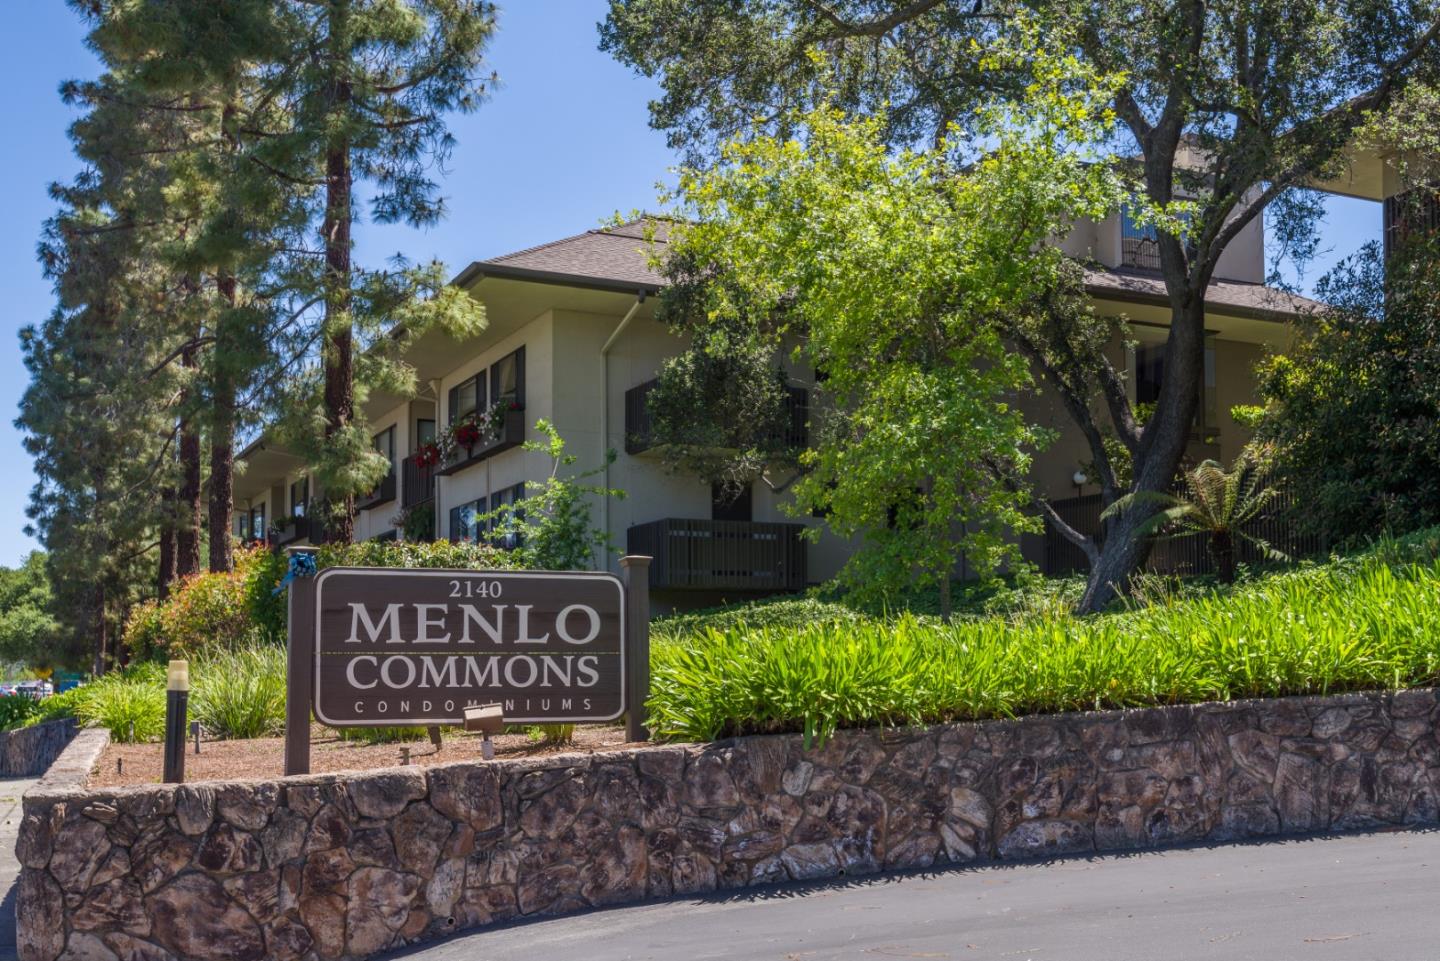 Rarely available corner unit on ground floor 2-bedroom 2-bath, located in the coveted community of Menlo Commons! This home is light, airy, and beautifully updated with hardwood floors, and a stylish kitchen complete with new granite countertops. The open floor plan invites you into the generously proportioned sunlit living space. This gated community for active adults 55 years+, offers beautifully manicured gardens, a community pool, spa, exercise facilities, an elegant clubhouse, & in-unit washer/dryers. A Fantastic location! Close to Stanford University, Stanford Shopping Center, Stanford Hospital, Sharon heights Shopping Center--easy access to I-280. HOA Dues includes water, garbage, cable and internet. Enjoy this peaceful retreat located in the highly desired Sharon Heights neighborhood.